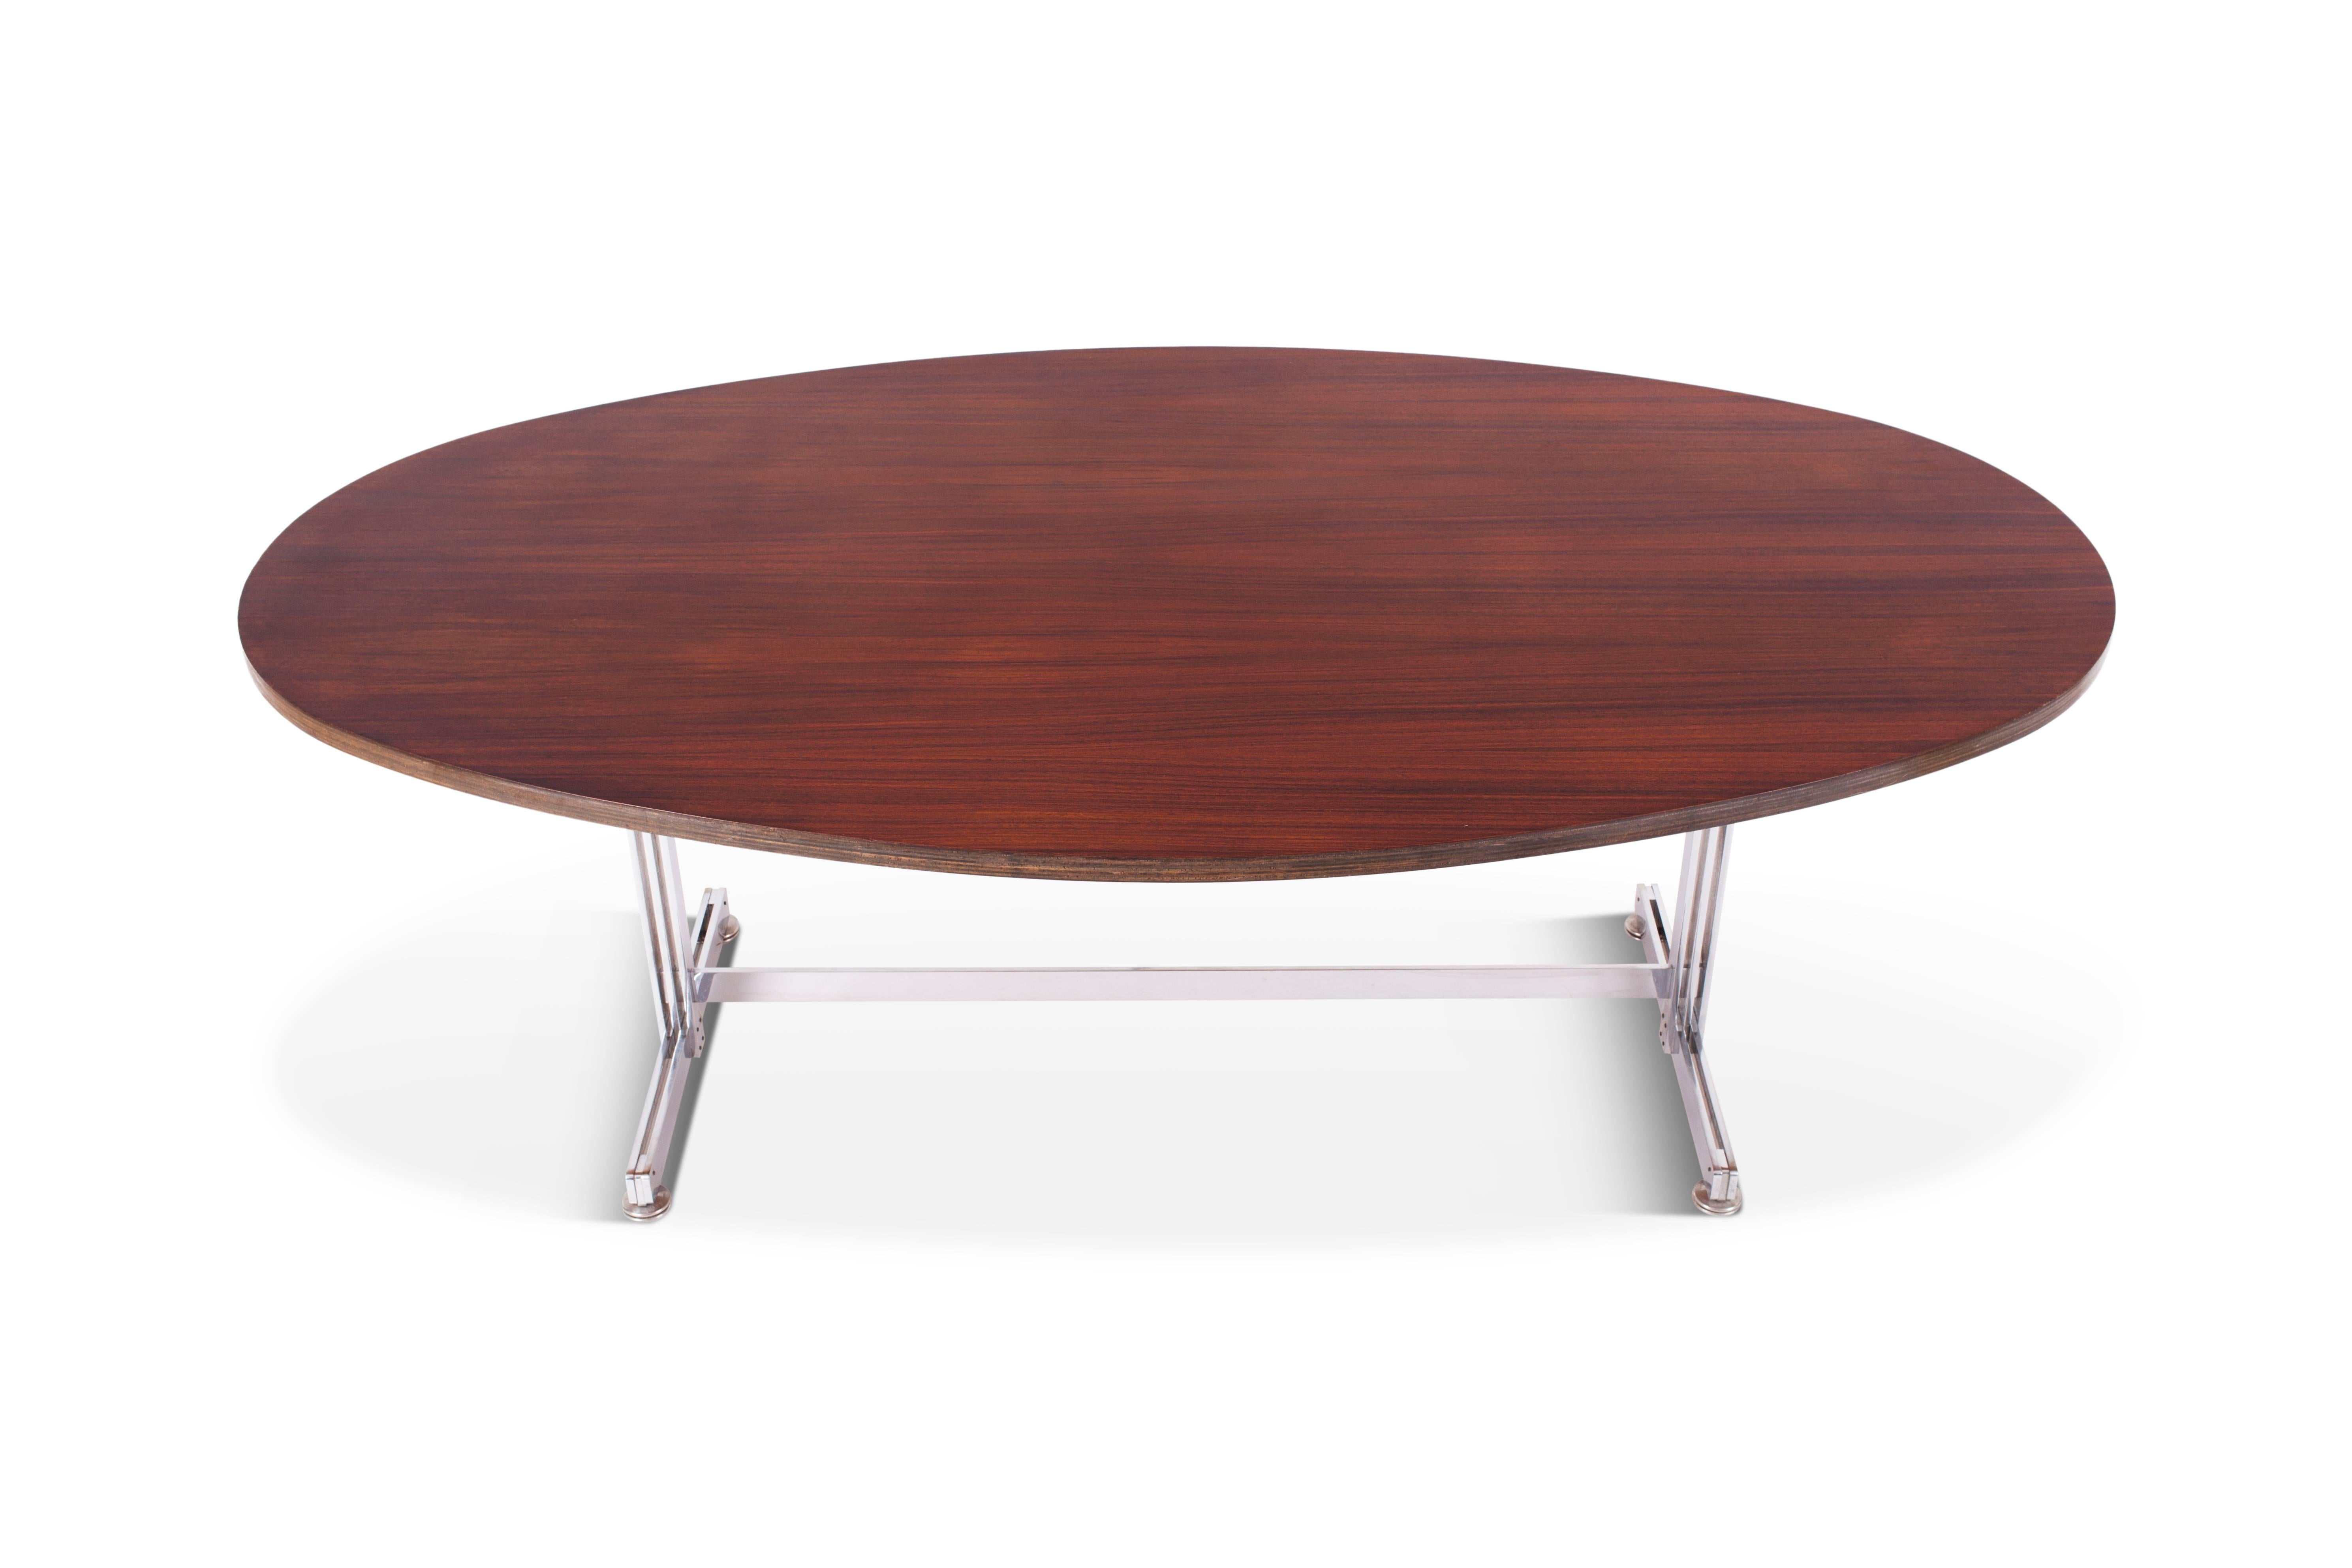 Jules Wabbes oval dining table for Mobilier Universel, circa 1960, Belgium.

Multiplex top rosewood veneer.
Heavy chrome-plated steel base.

Dimensions: W 200 cm, D 120 cm, H 75 cm.